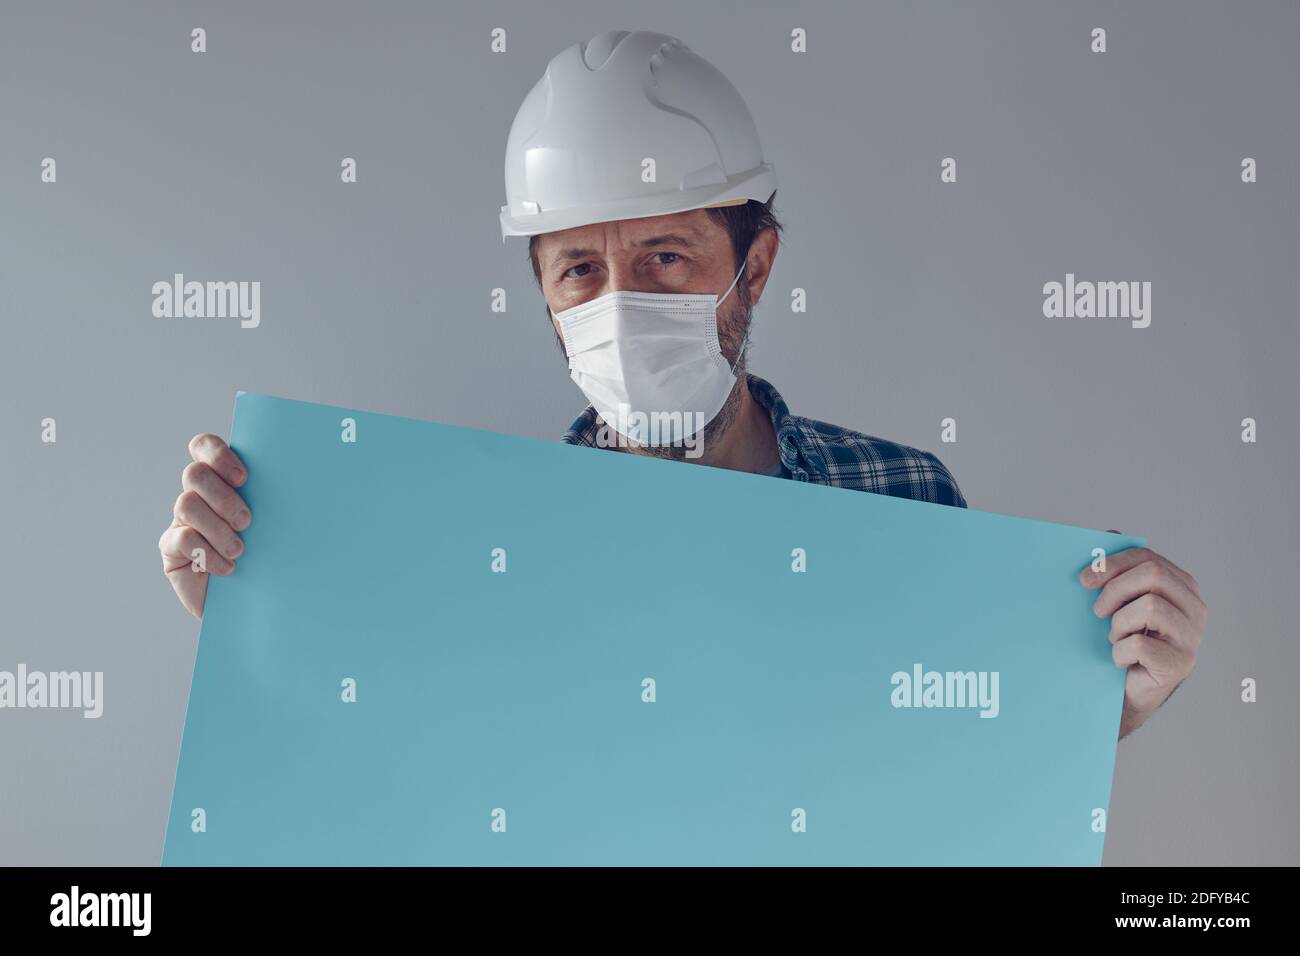 Construction engineer with white safety helmet and protective mask holding blank paper poster as copy space for text of graphics Stock Photo